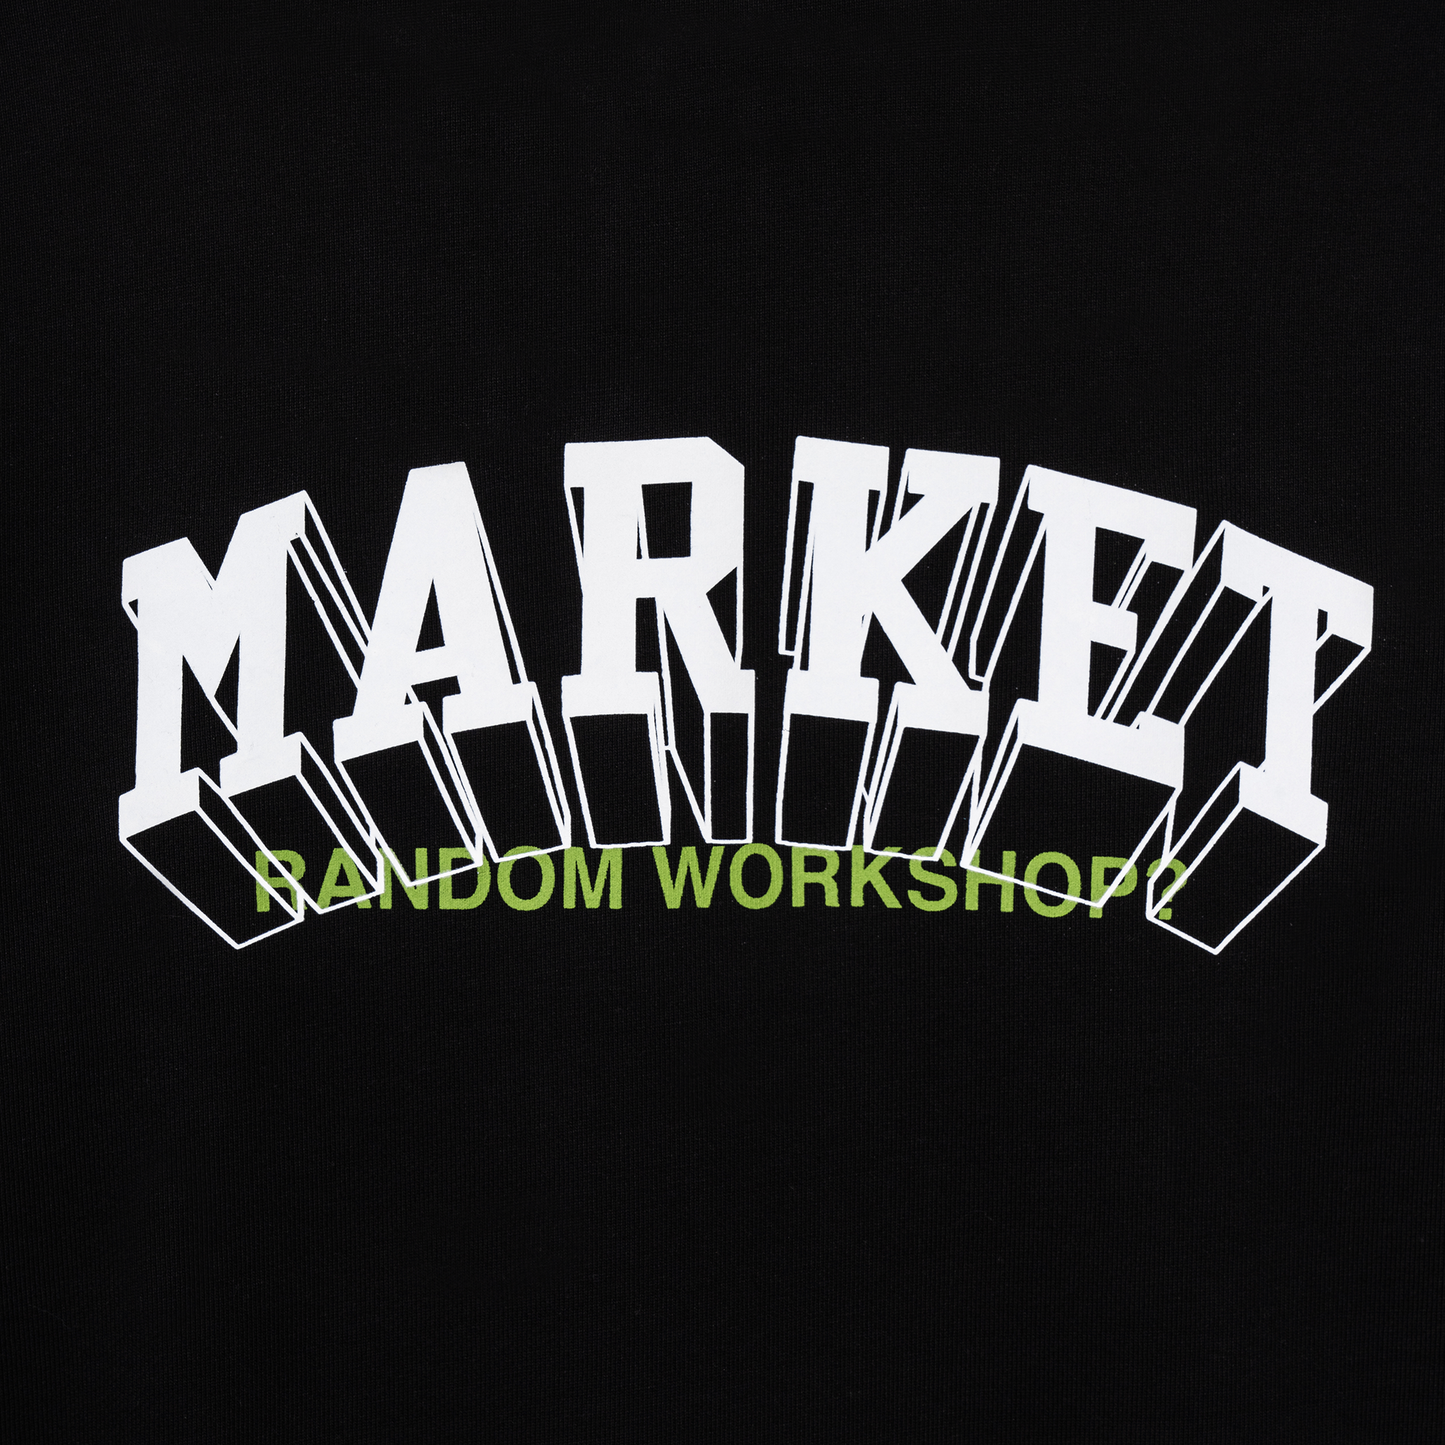 MARKET clothing brand SUPER MARKET PULLOVER HOODIE. Find more graphic tees, hats and more at MarketStudios.com. Formally Chinatown Market.